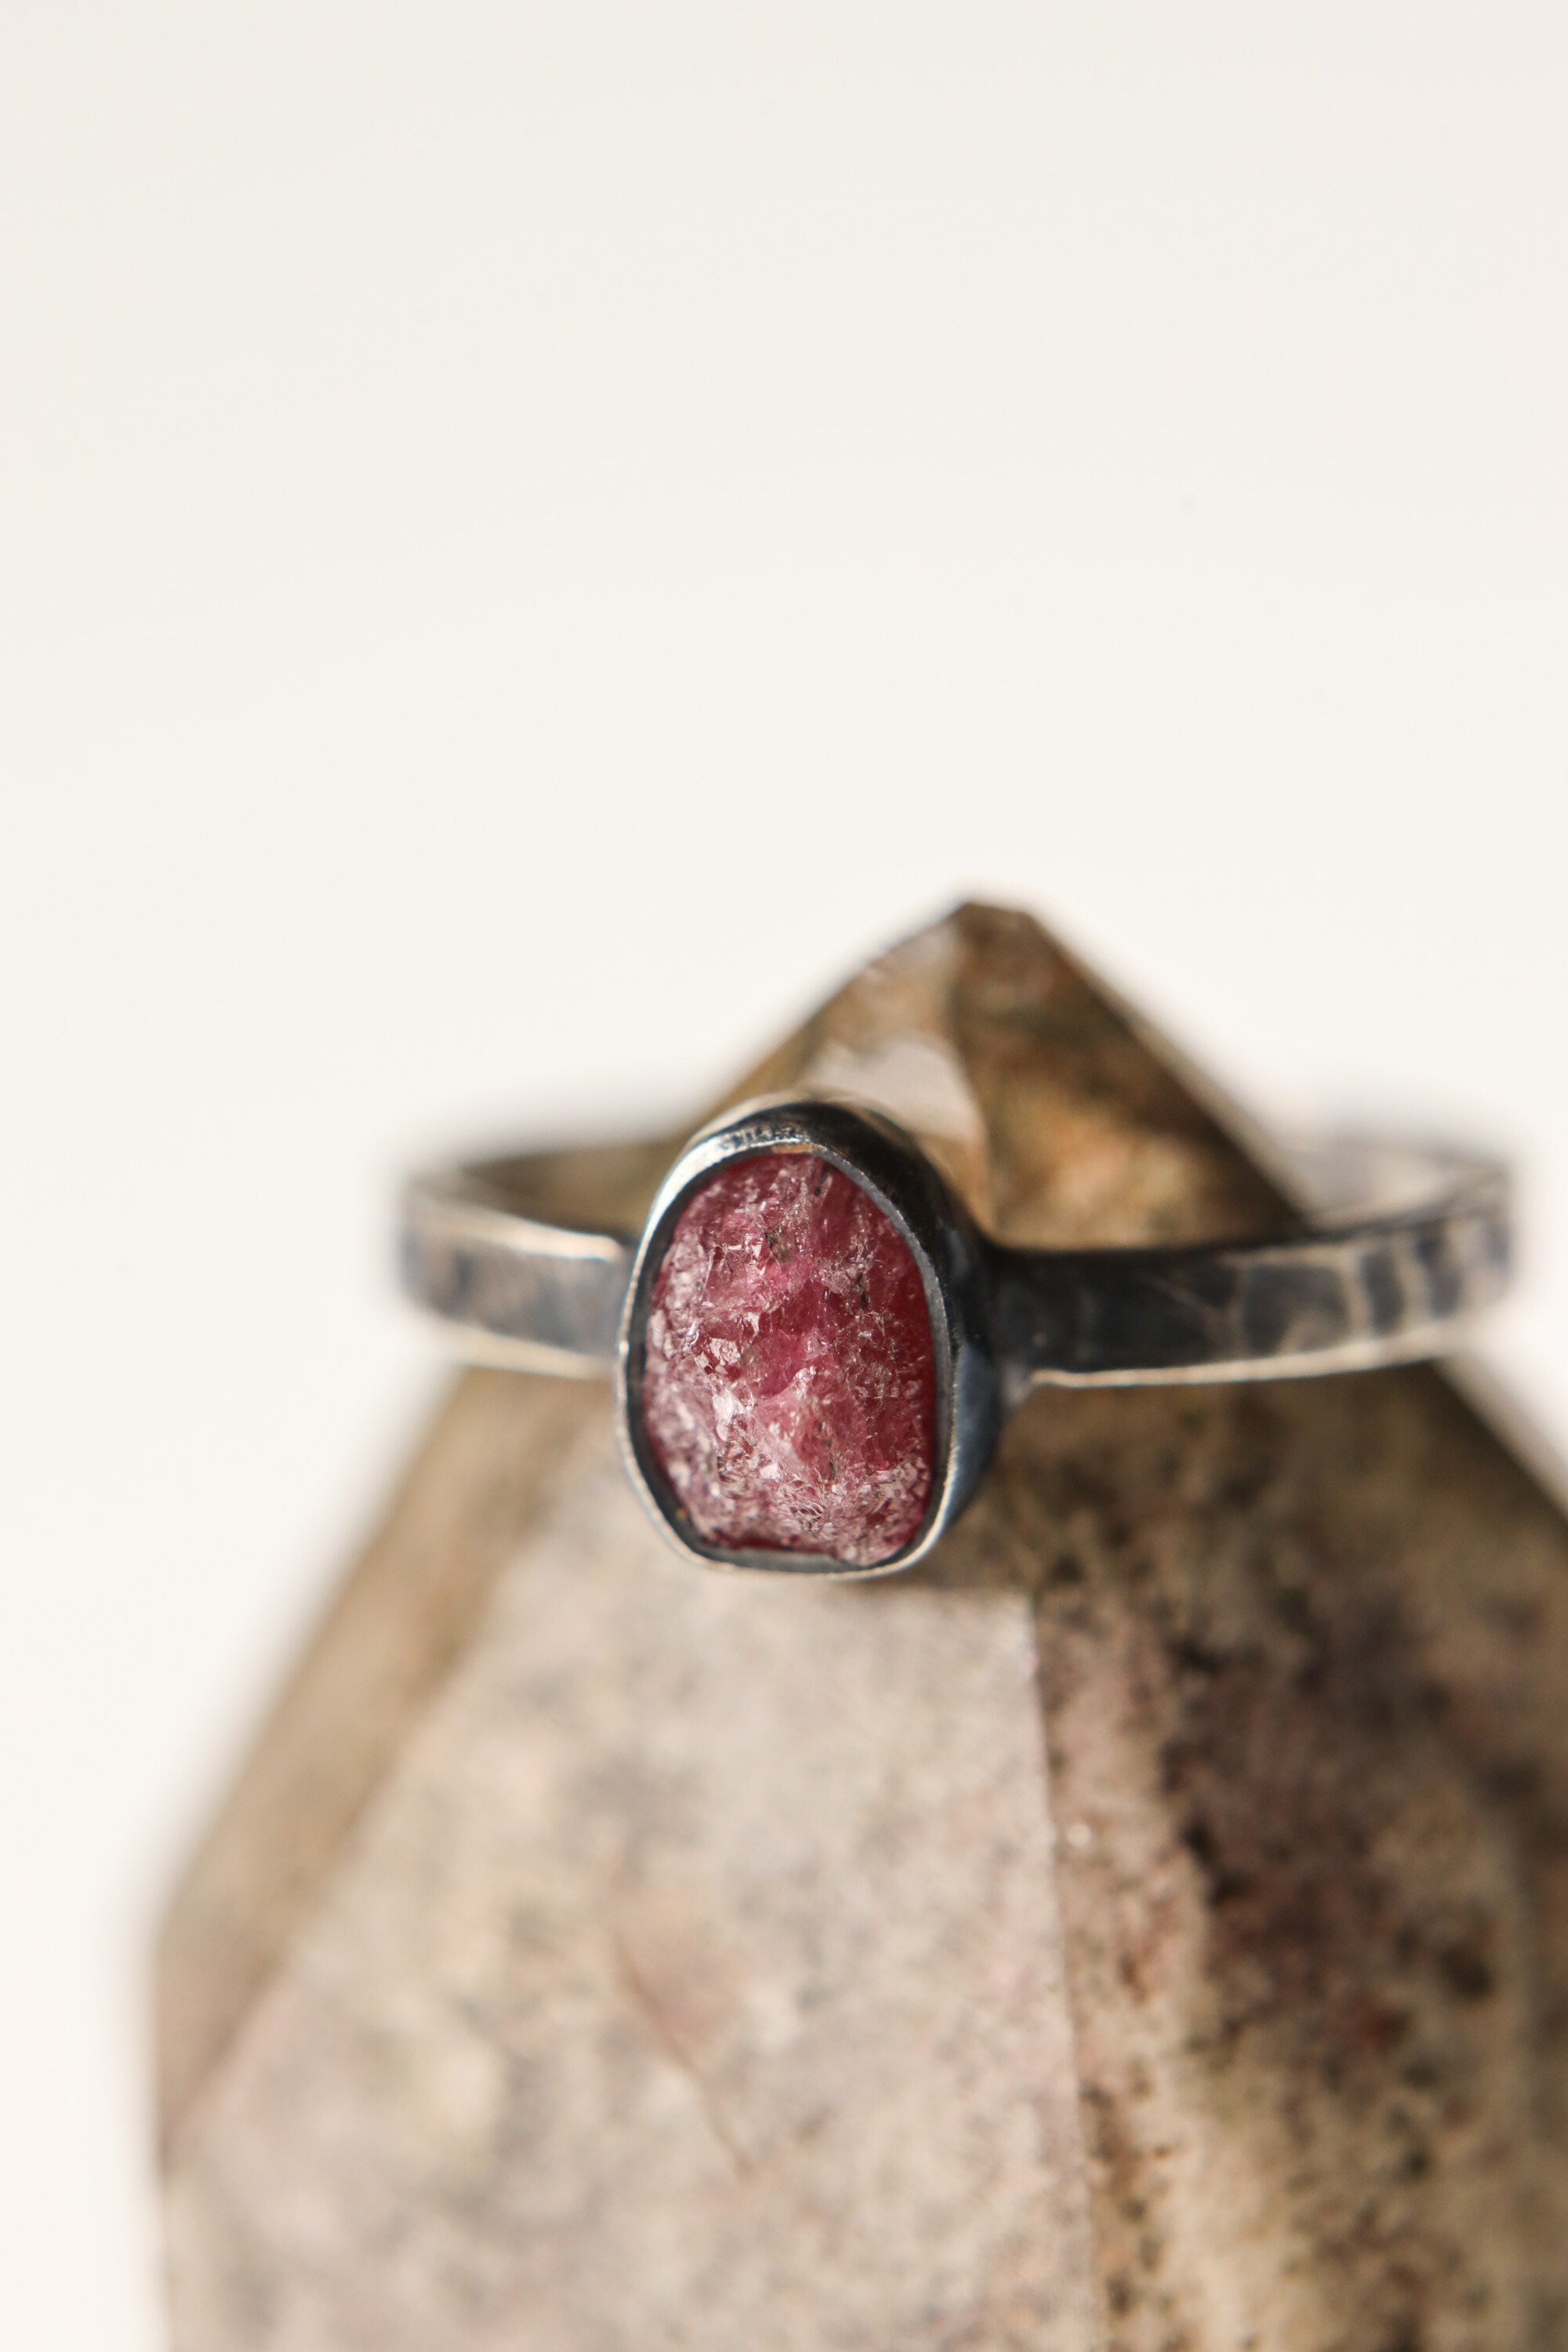 Eternal Blush - Sterling Silver Ring with Pink Tourmaline - Size 7 US - NO/05